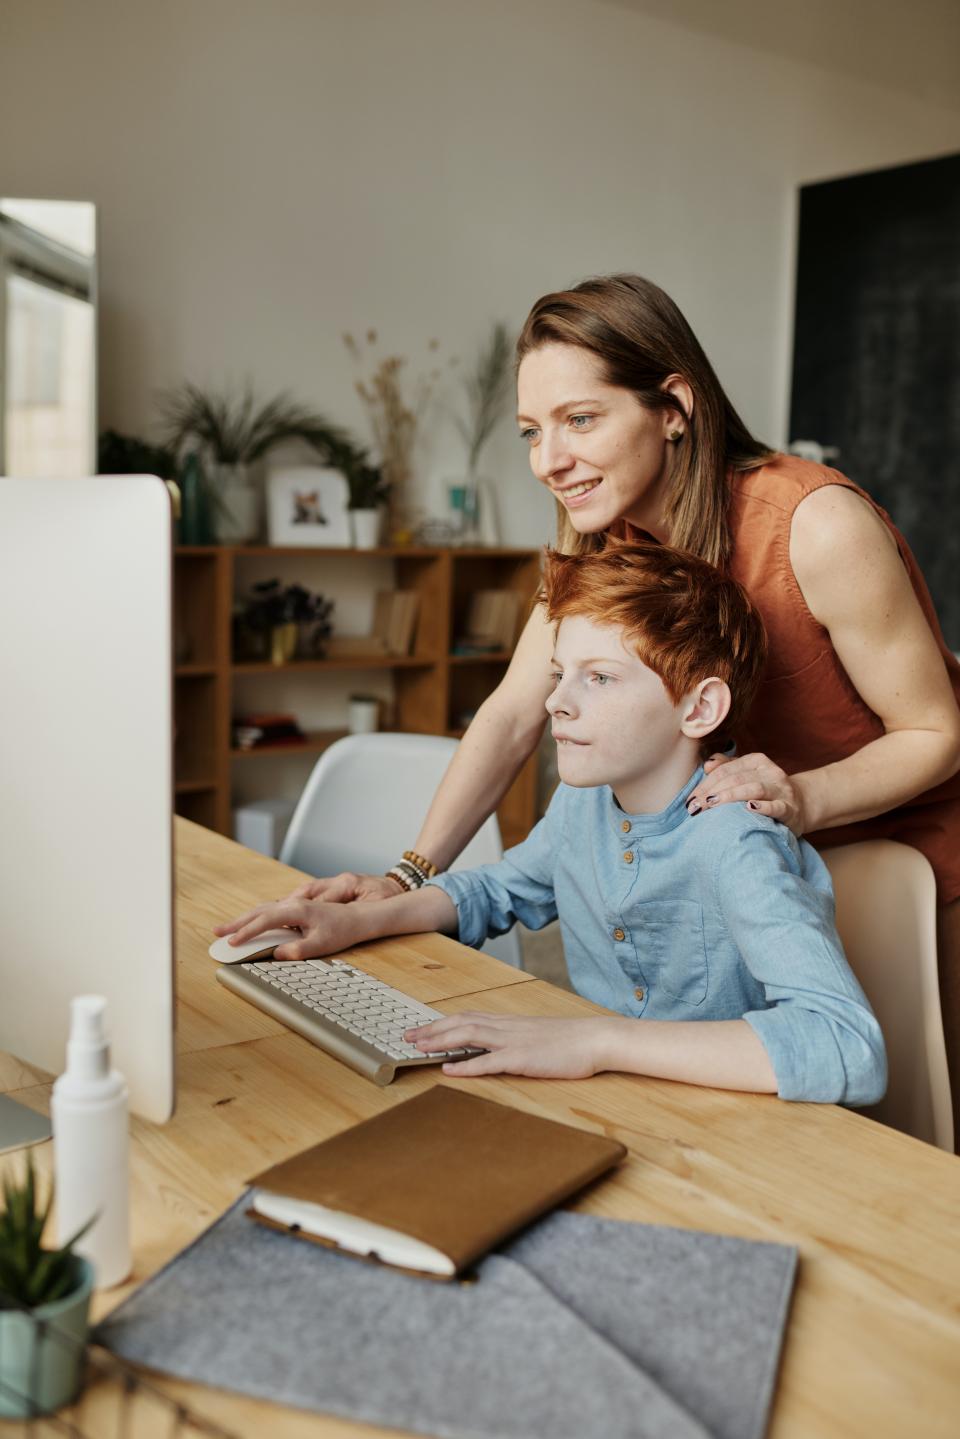 child being supervised on computer by an adult supervisor